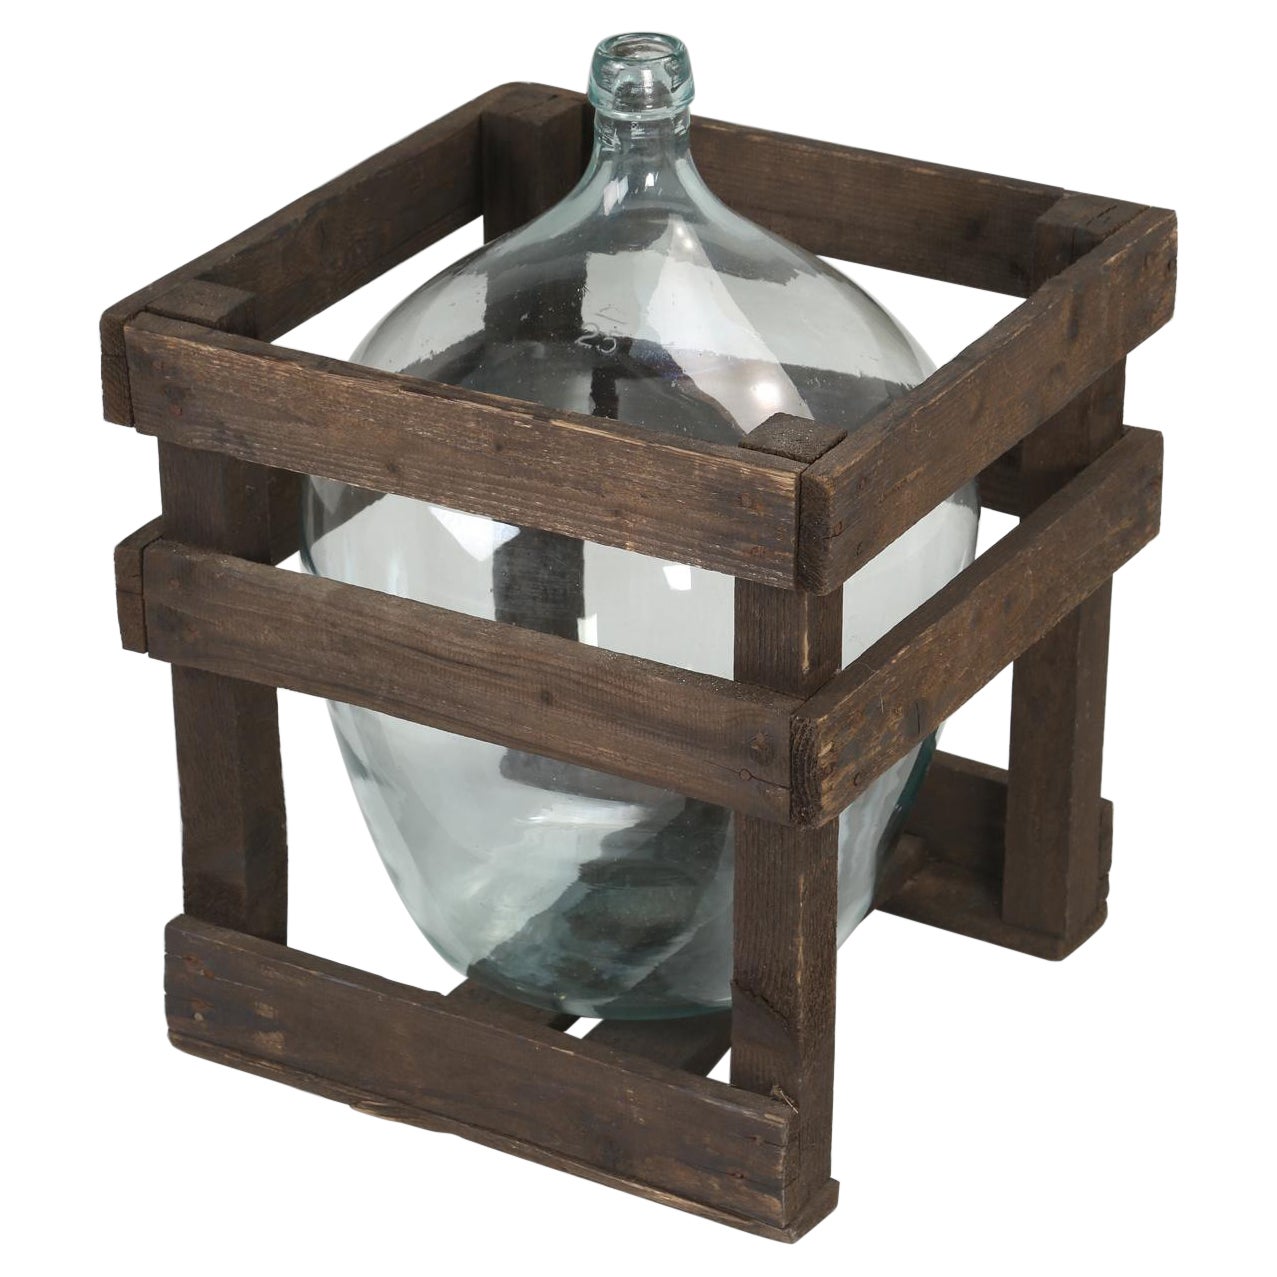 Demijohn or Carboy Glass Vessel in the Original Wooden Carrying Crate For Sale